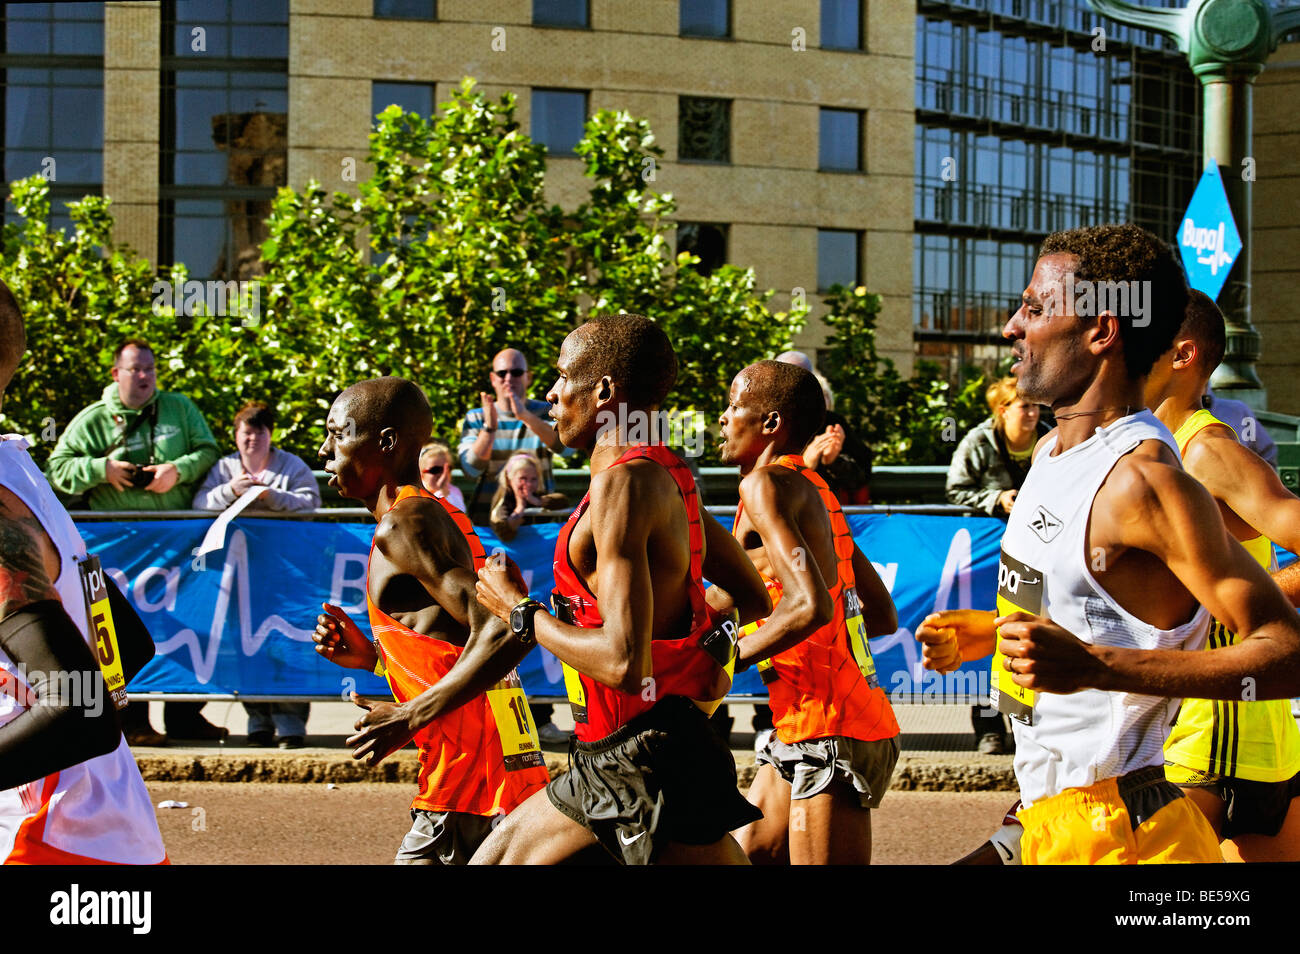 Bupa Great North Run. Race leaders including eventual race winner Martin Lel is the central runner in the image Stock Photo